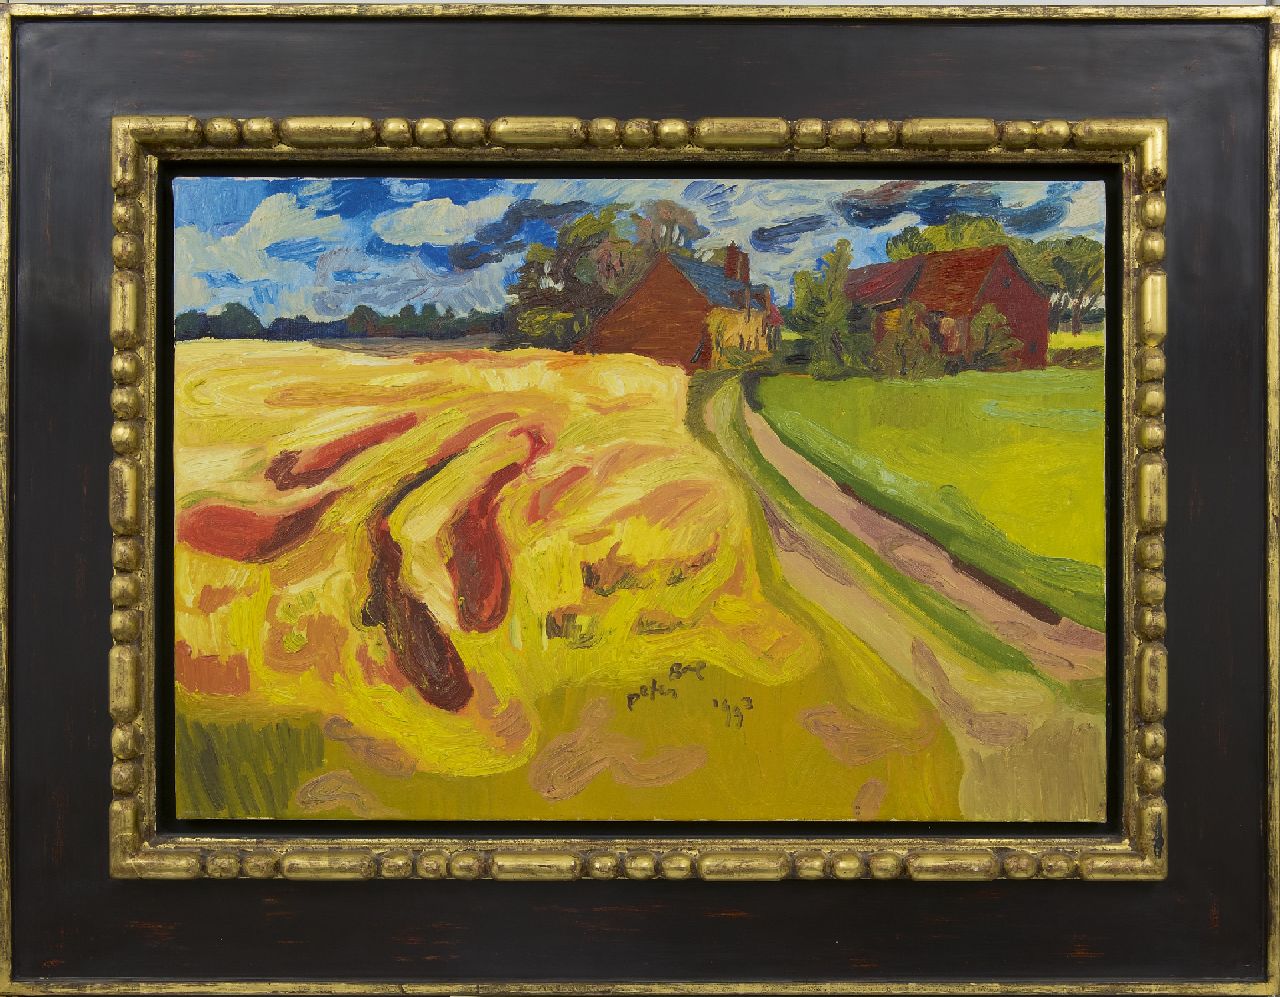 Bol P.P.J.  | 'Peter' Paul Jan Bol, Cornfield with farms, oil on canvas 56.3 x 81.2 cm, signed l.r. and dated 1993